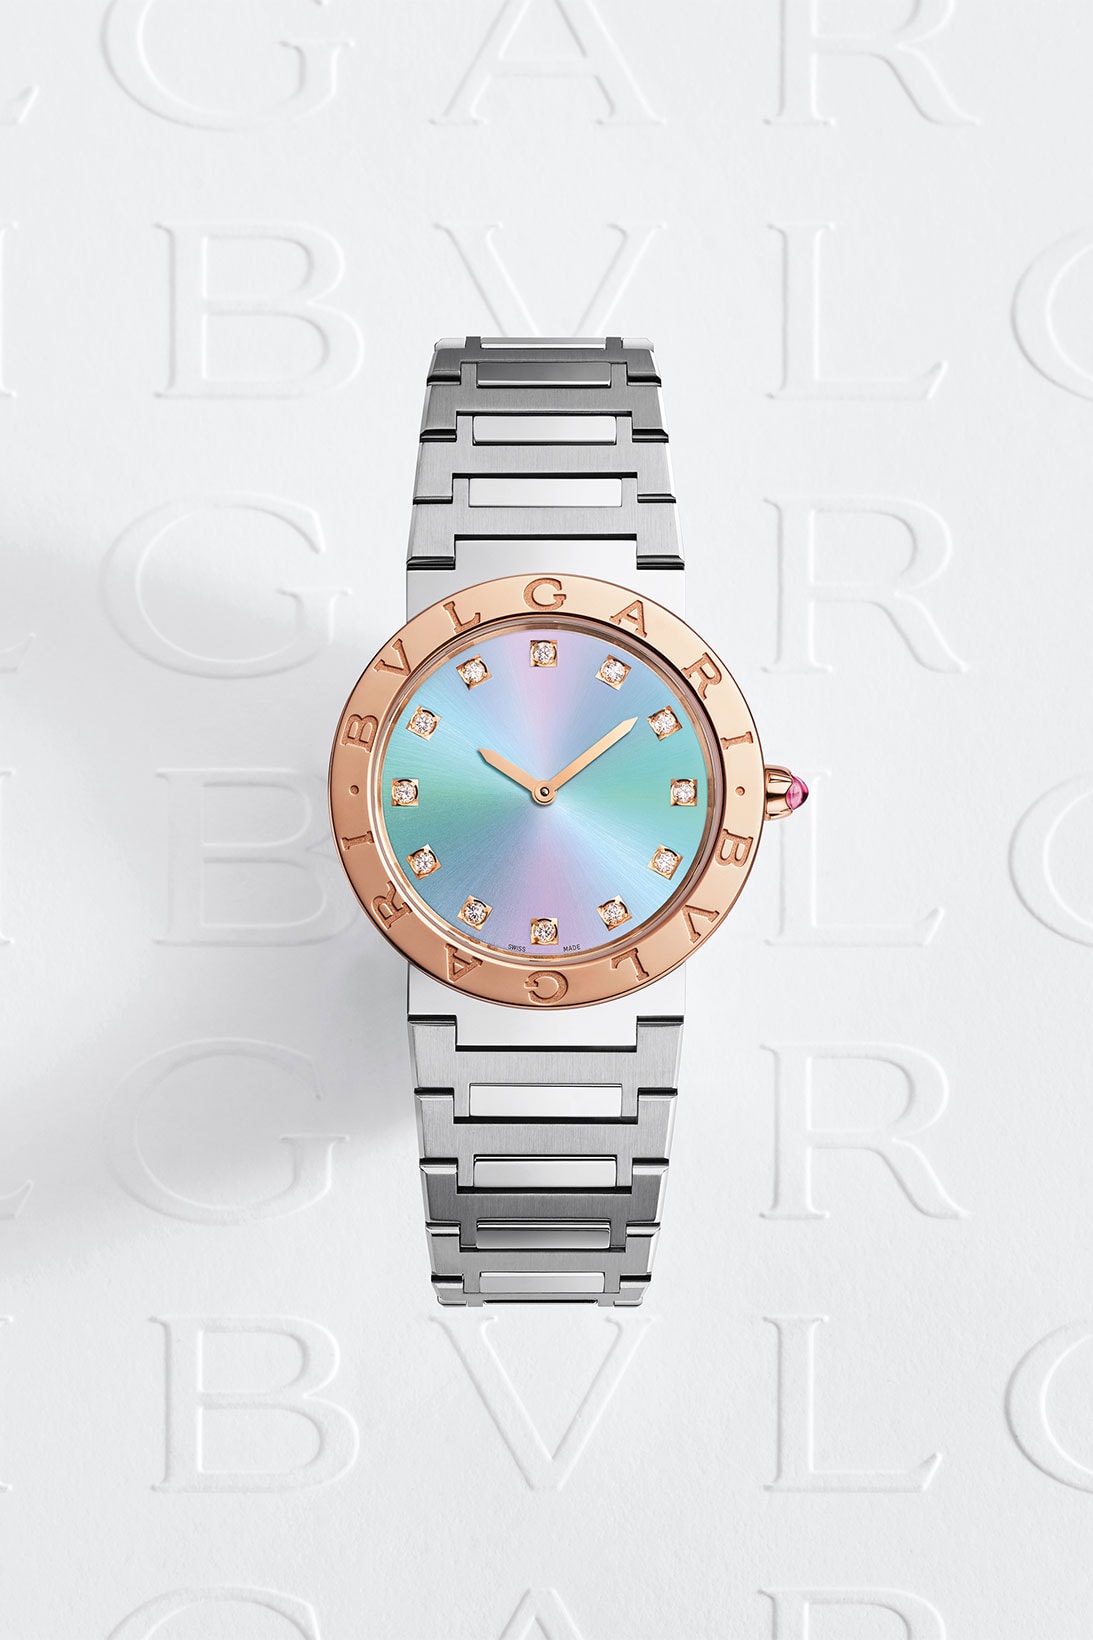 BLACKPINK Lisa BVLGARI Watch Collaboration Limited Edition 103759 103860 Release 